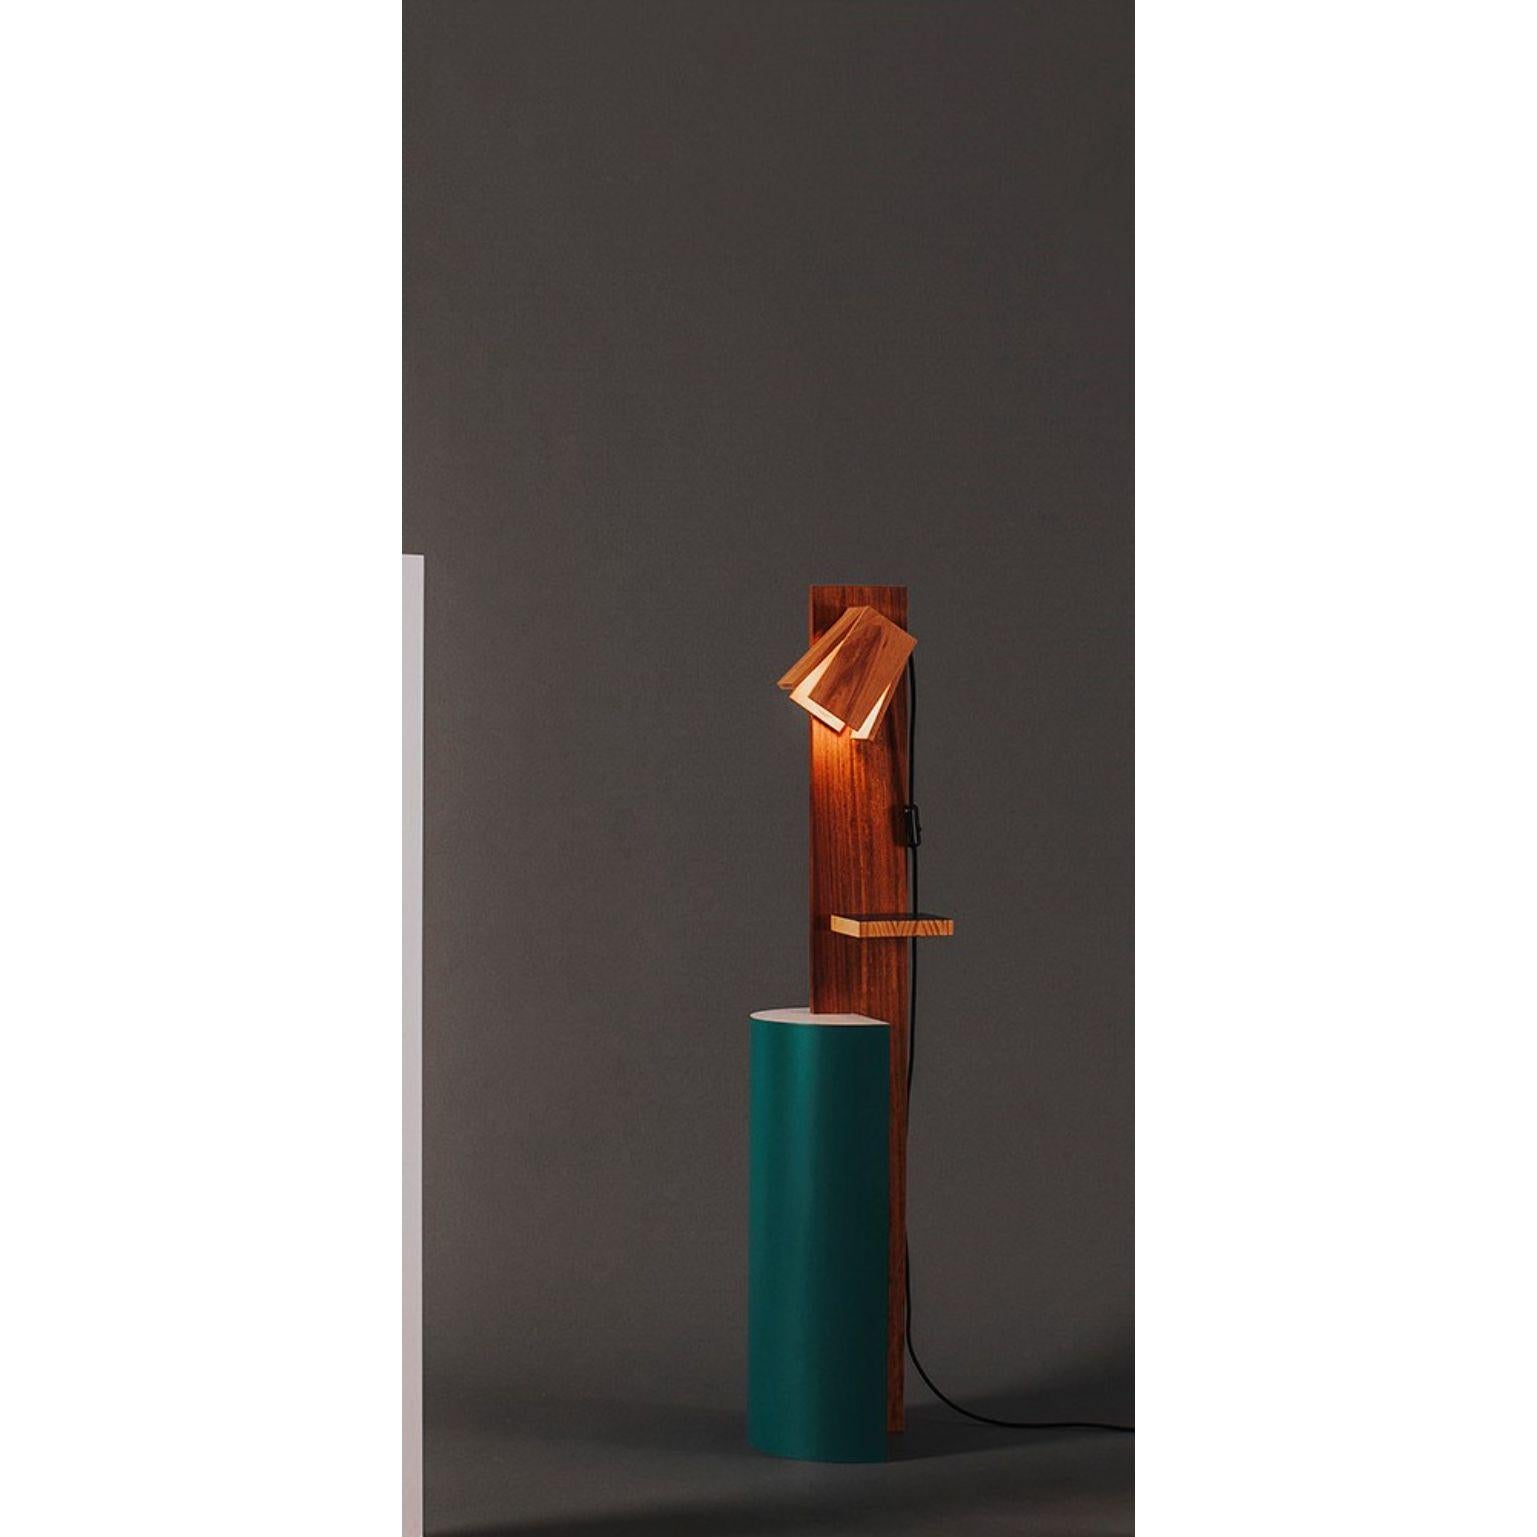 Medium Formica floor lamp by Owl
Dimensions: H 130 x L 30 x W 30 cm
Materials: Solid wood, colourful formica

Formica is a series in which material defines form. The collection combines solid wood with colourful Formica, creating a furniture